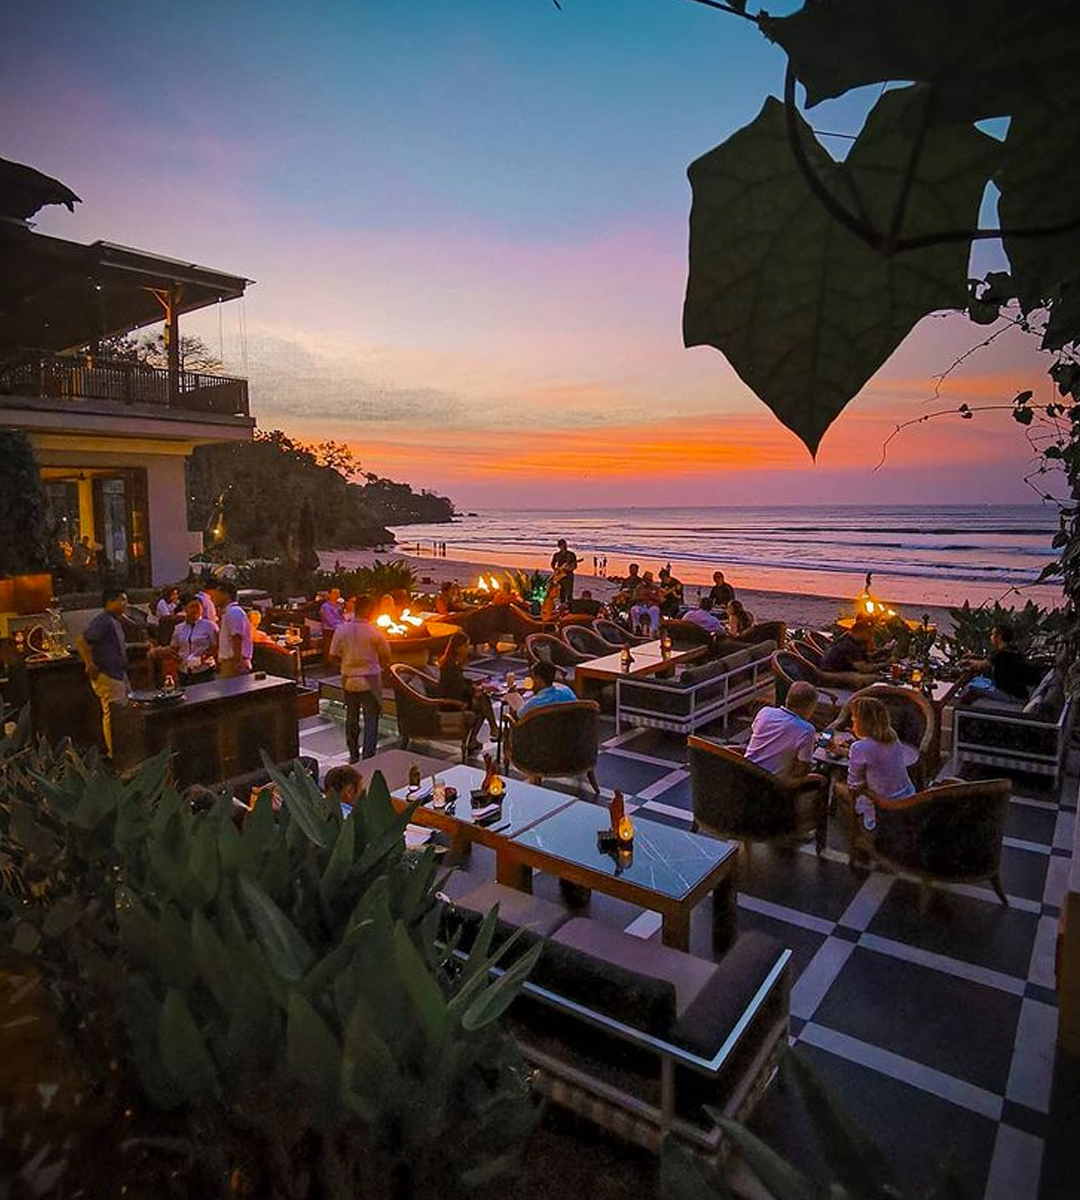 people dining on a patio at sunset